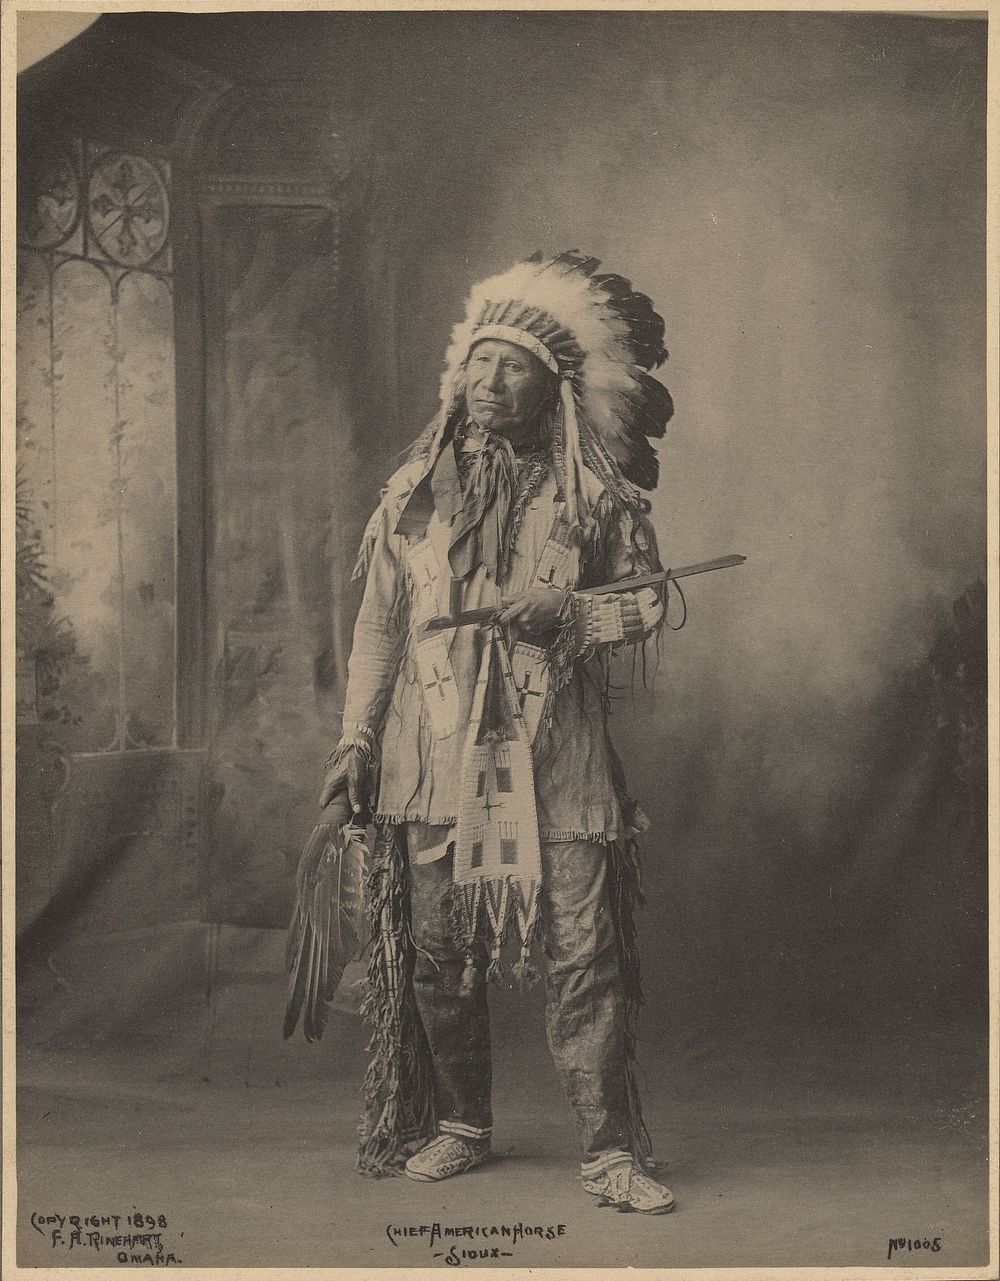 Chief American Horse, Sioux by Adolph F Muhr and Frank A Rinehart